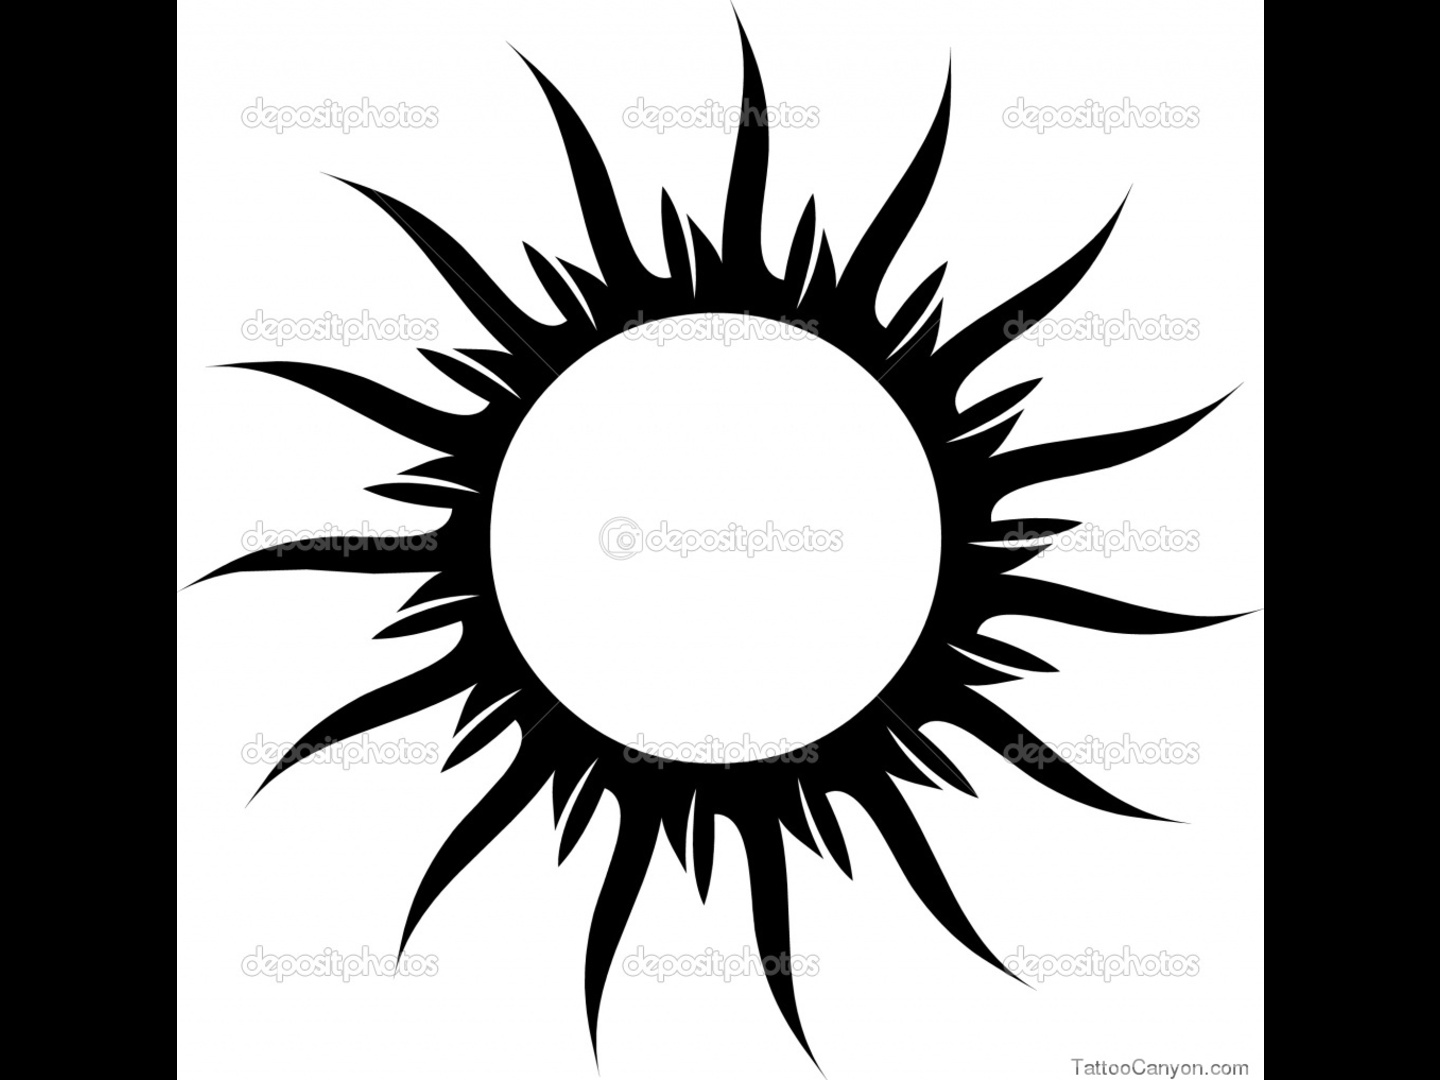 15 Black And White Sun Vector Images